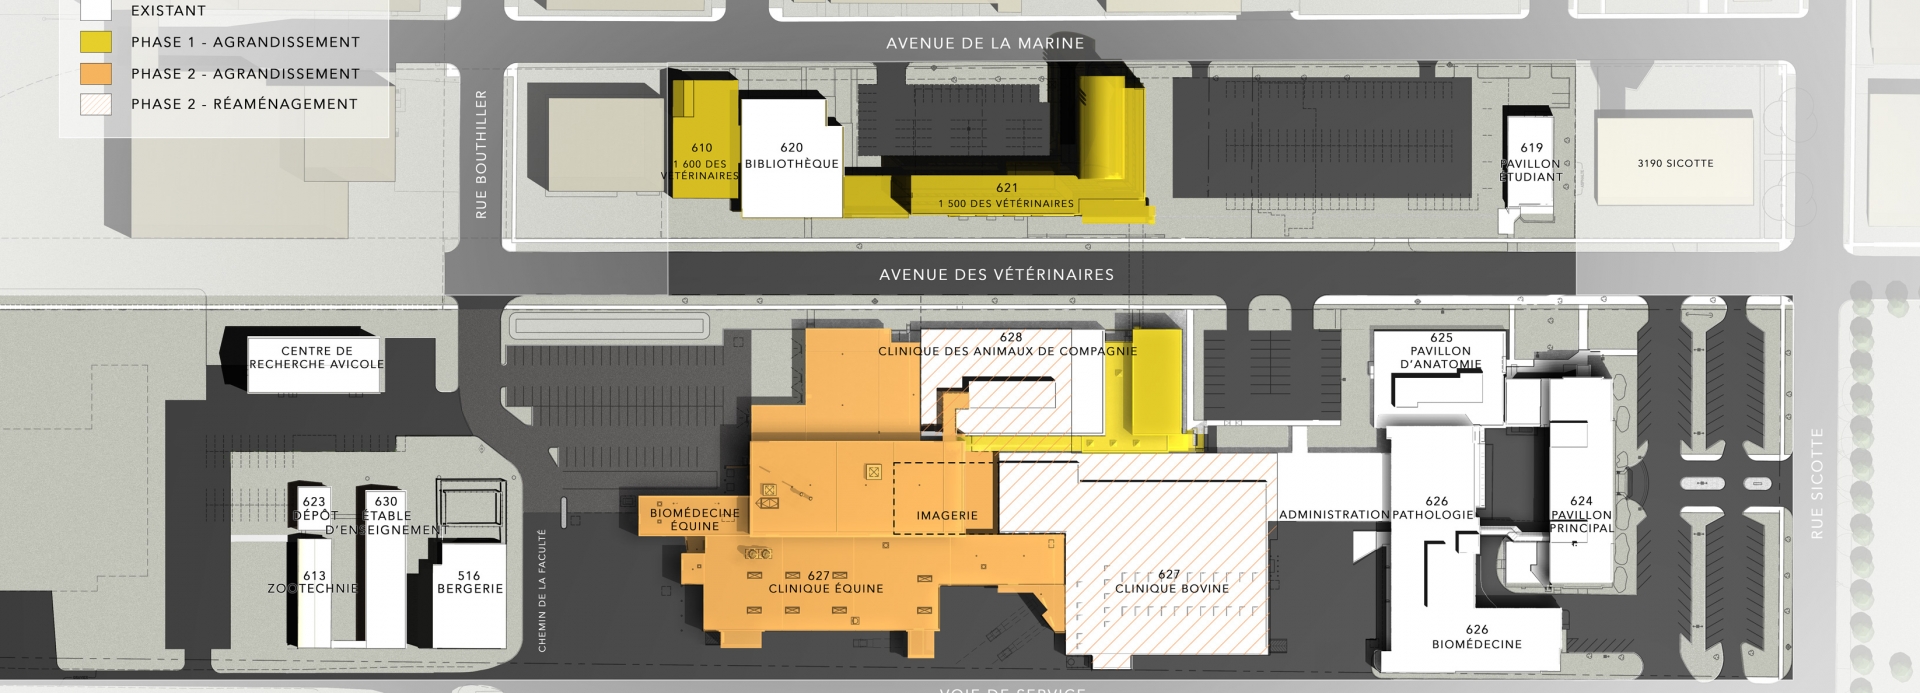 Renovation and Expansion of the University Veterinary Hospital Center (CHUV) | University of Montreal